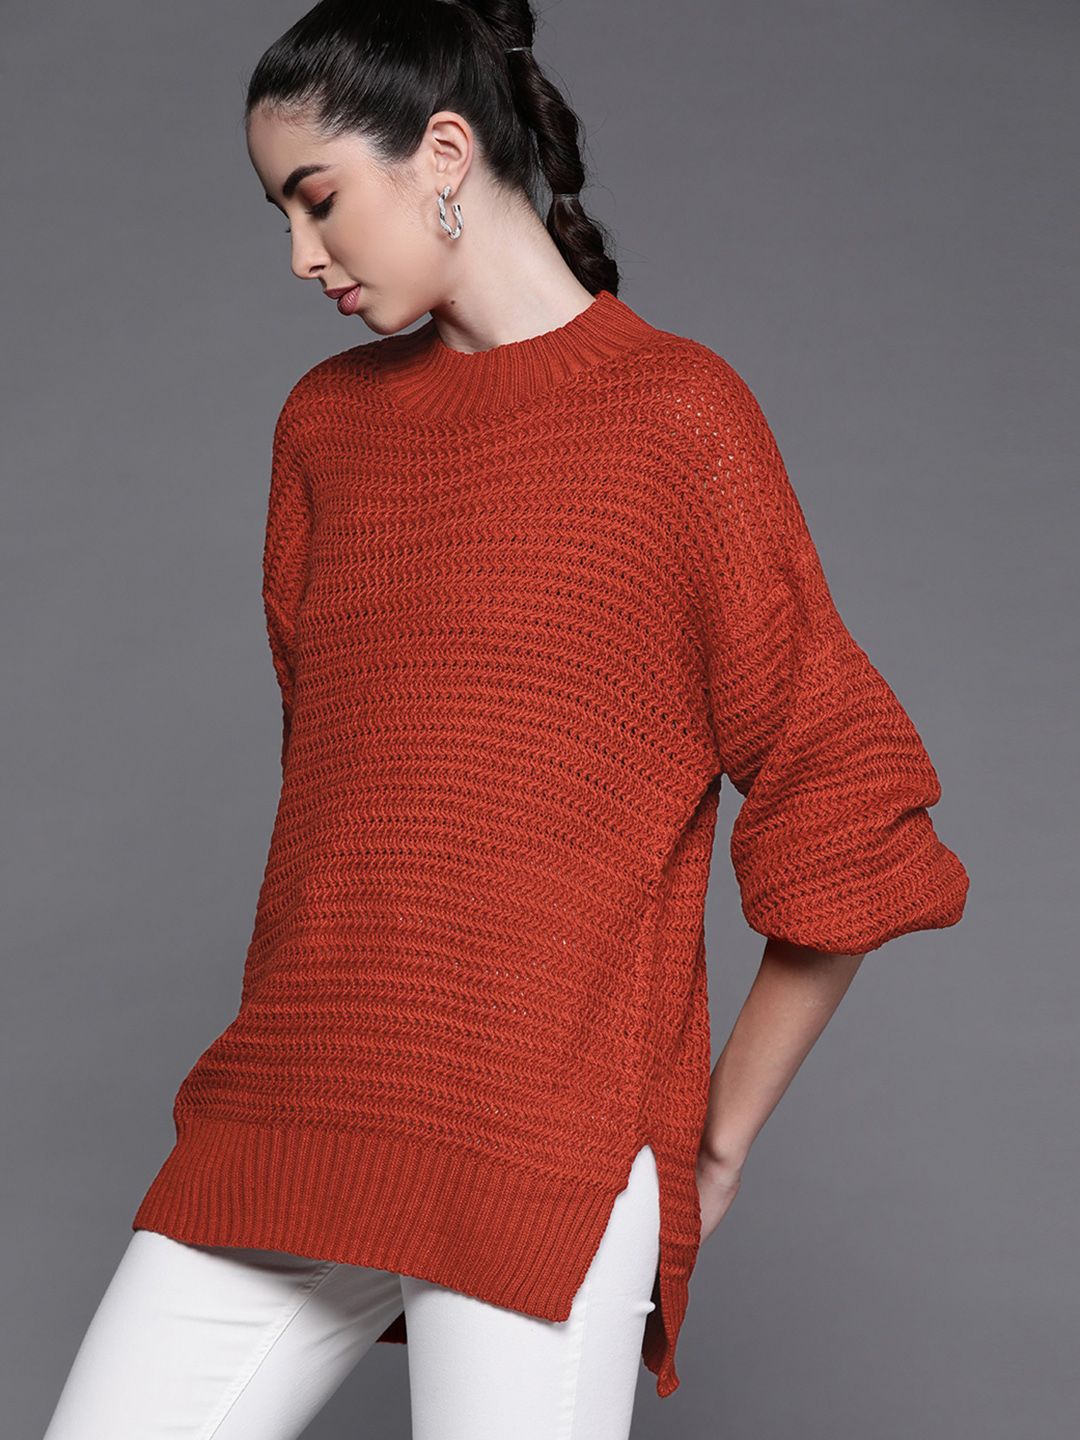 JC Mode Women Rust Orange Open Knit High-Low Pullover Price in India